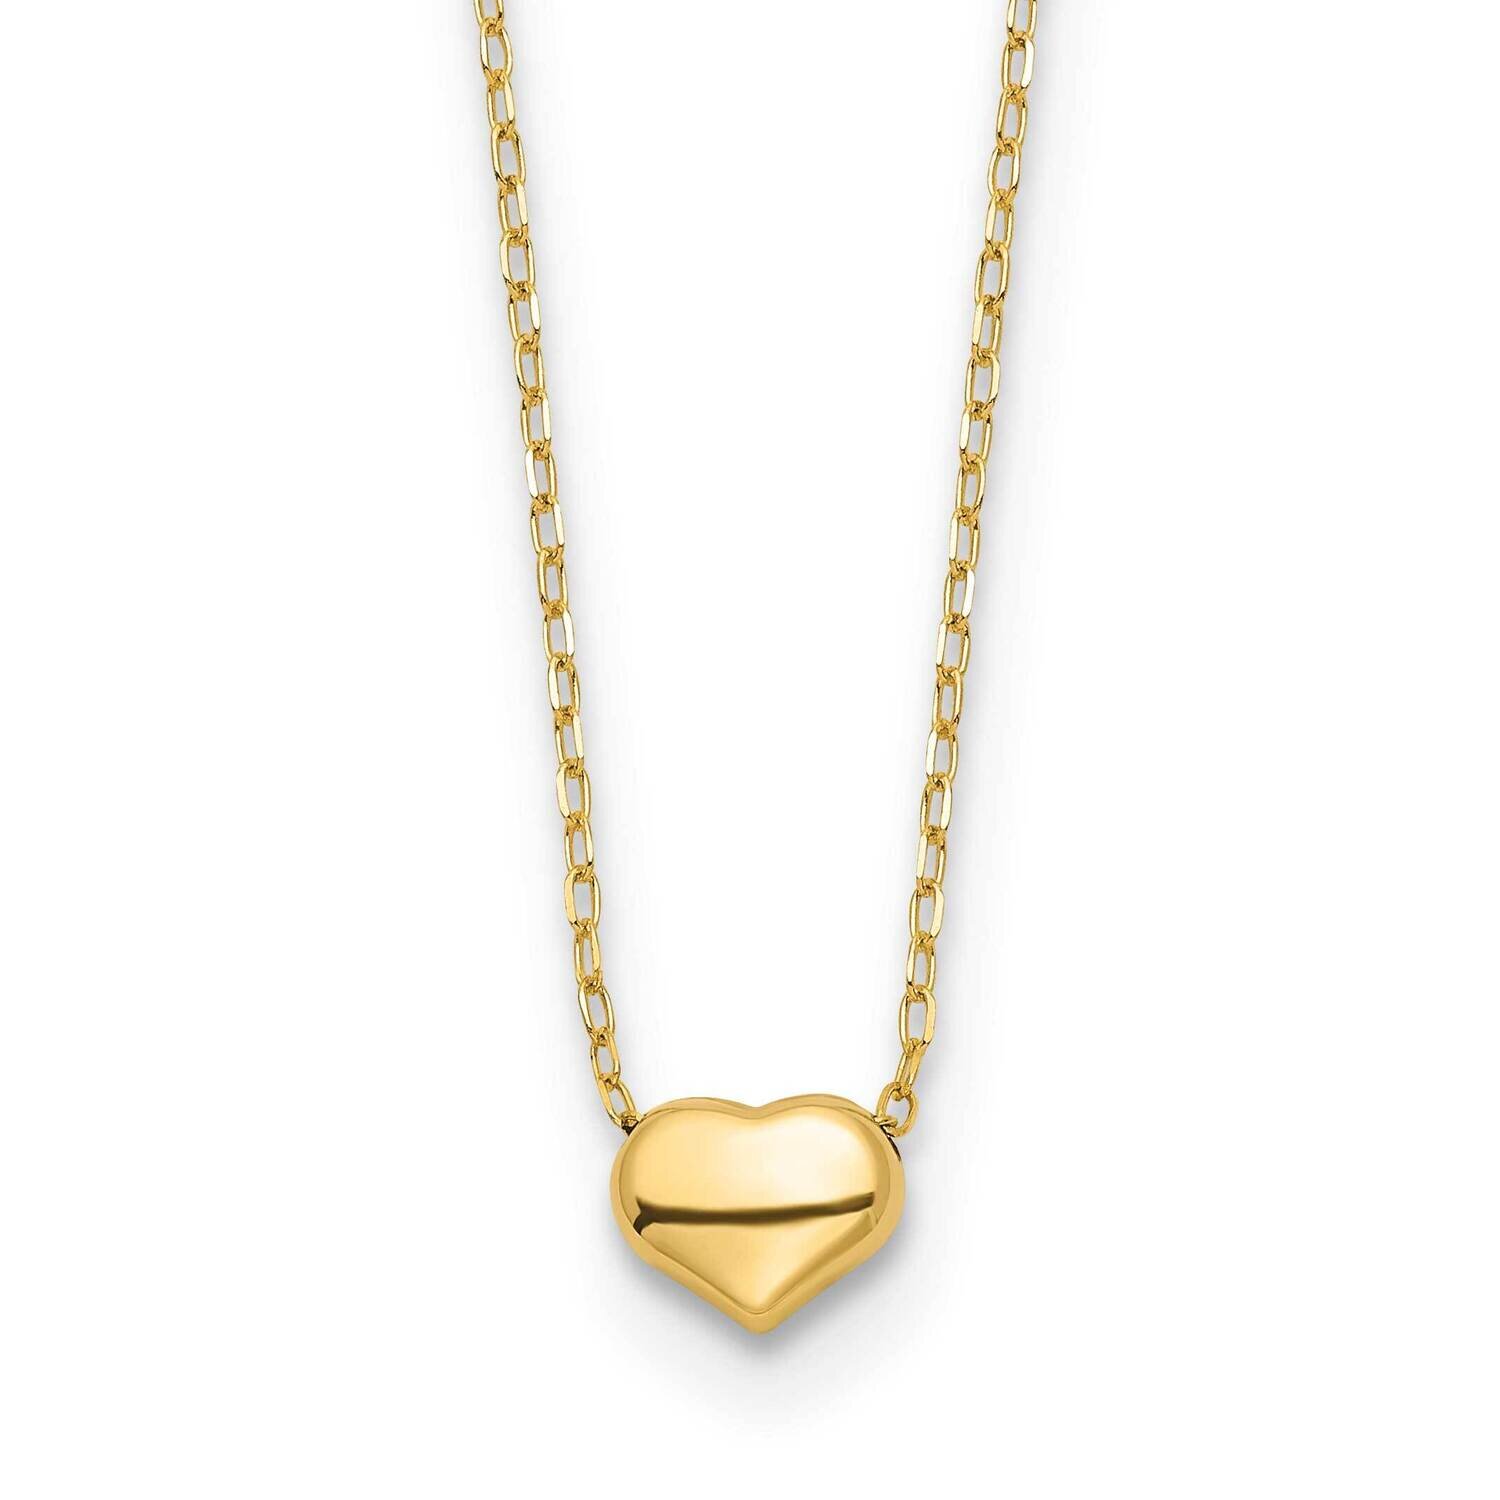 Heart 16.5 Inch Necklace 14k Gold Polished SF2870-16.5